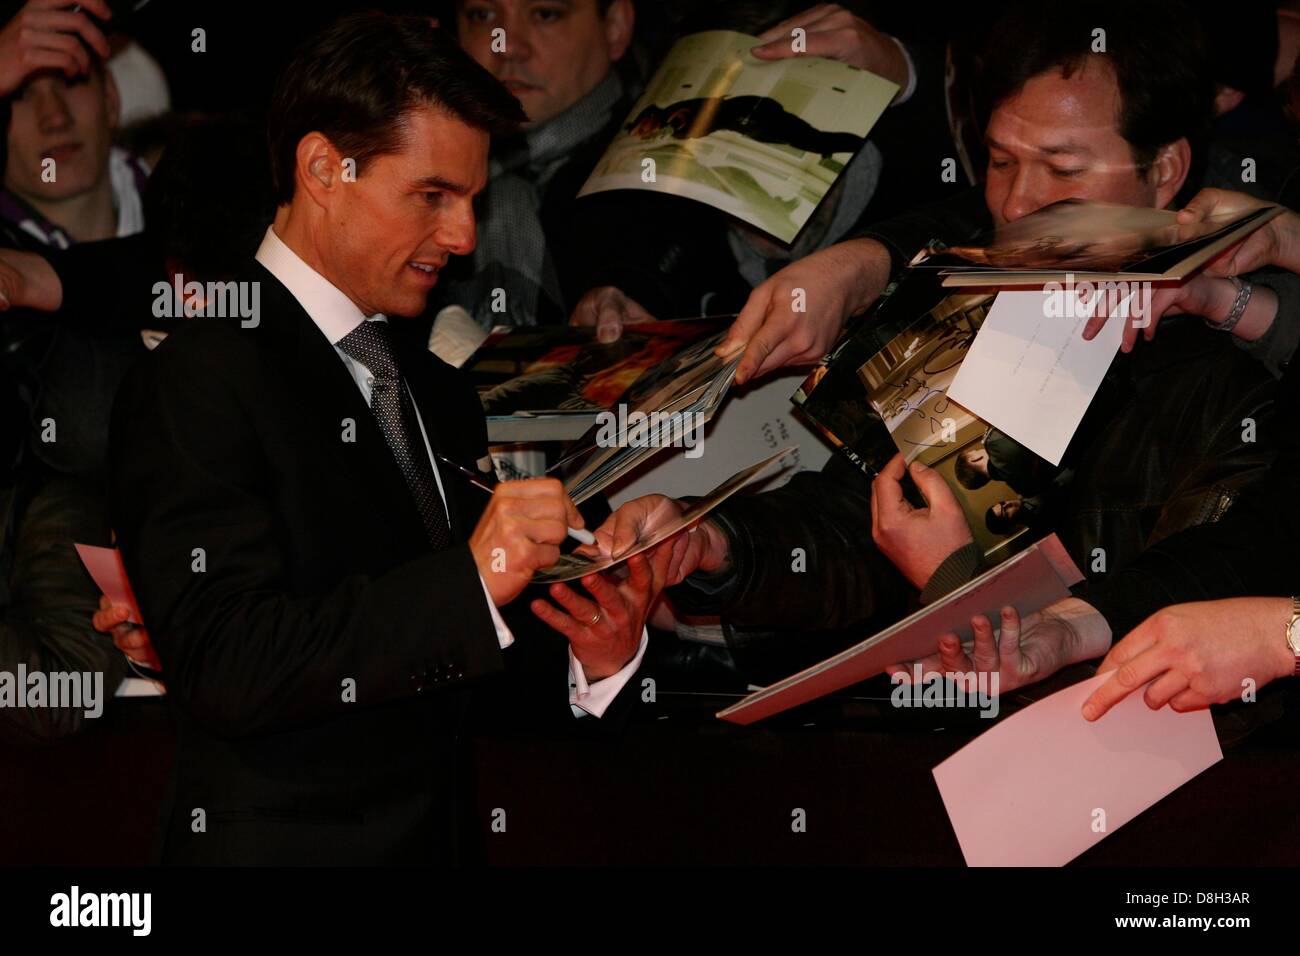 Tom Cruise at the premiere of 'Valkyrie' in the Berlinale Palace in Berlin on the 20th of January in 2009. Stock Photo